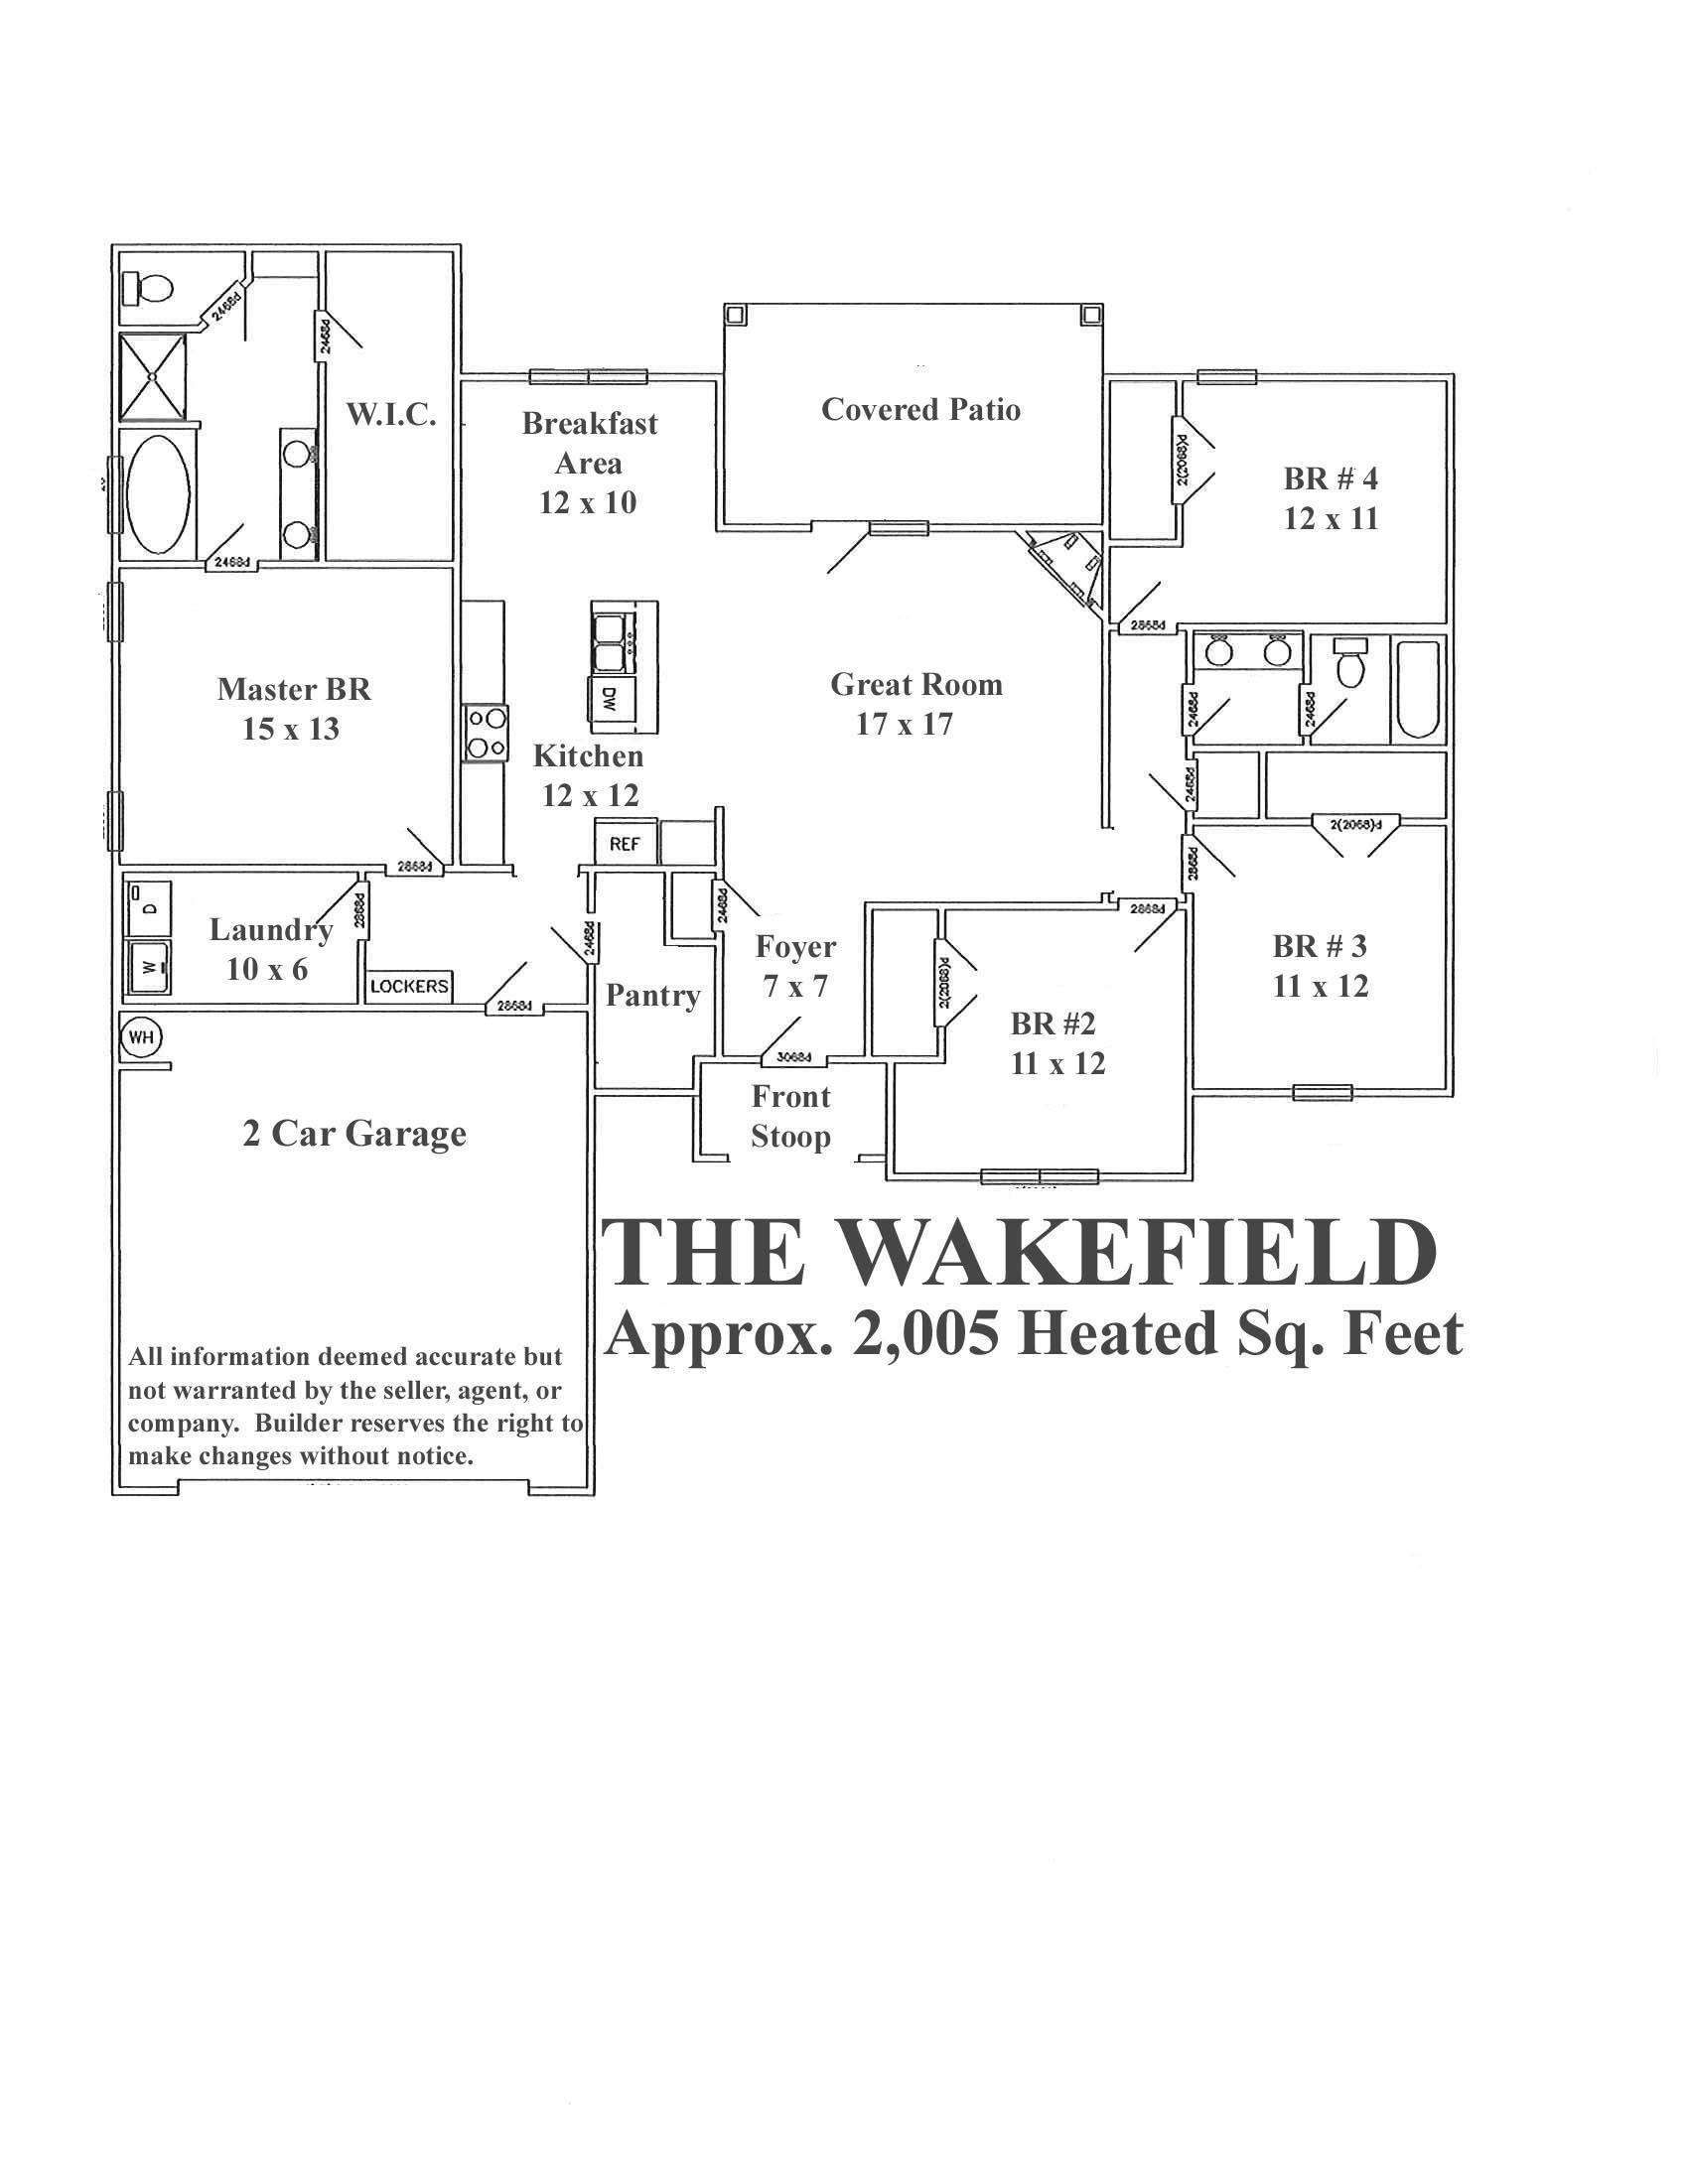 The Wakefield